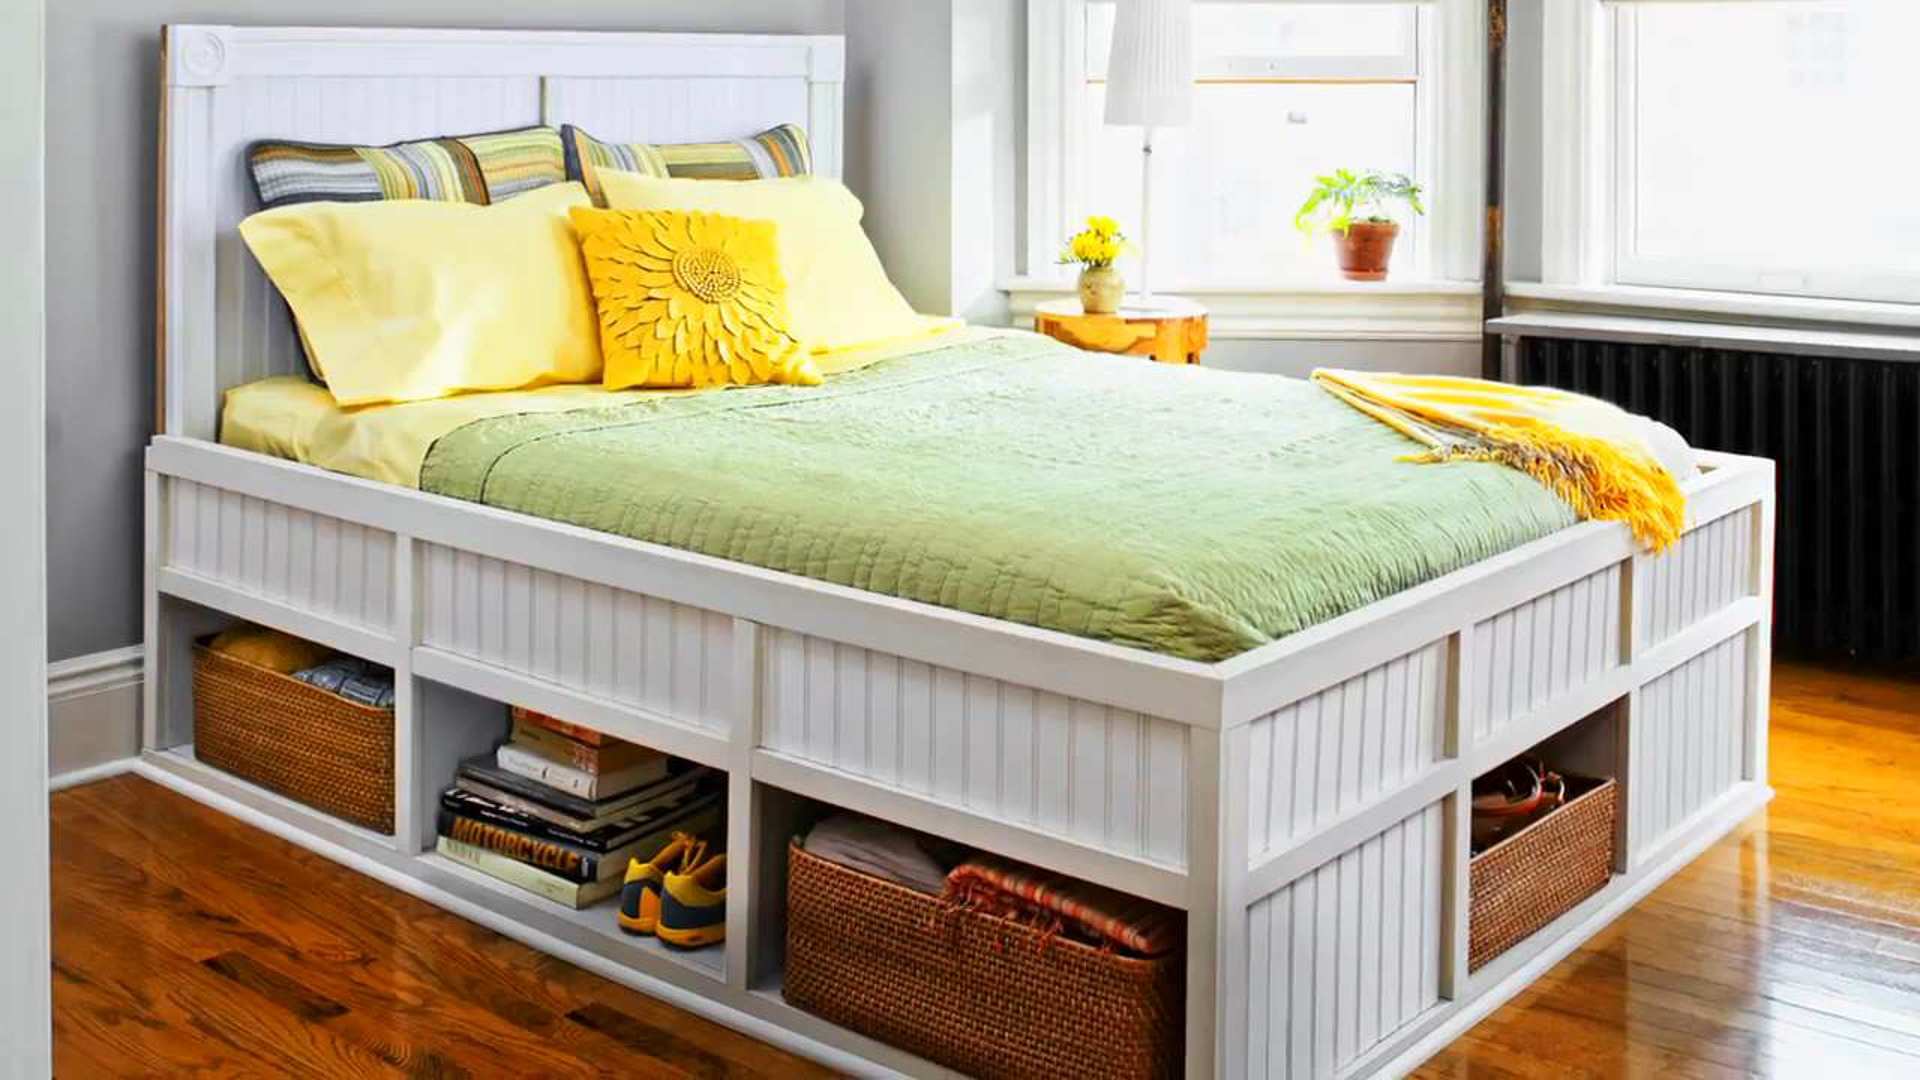 How To Build A Storage Bed This Old House